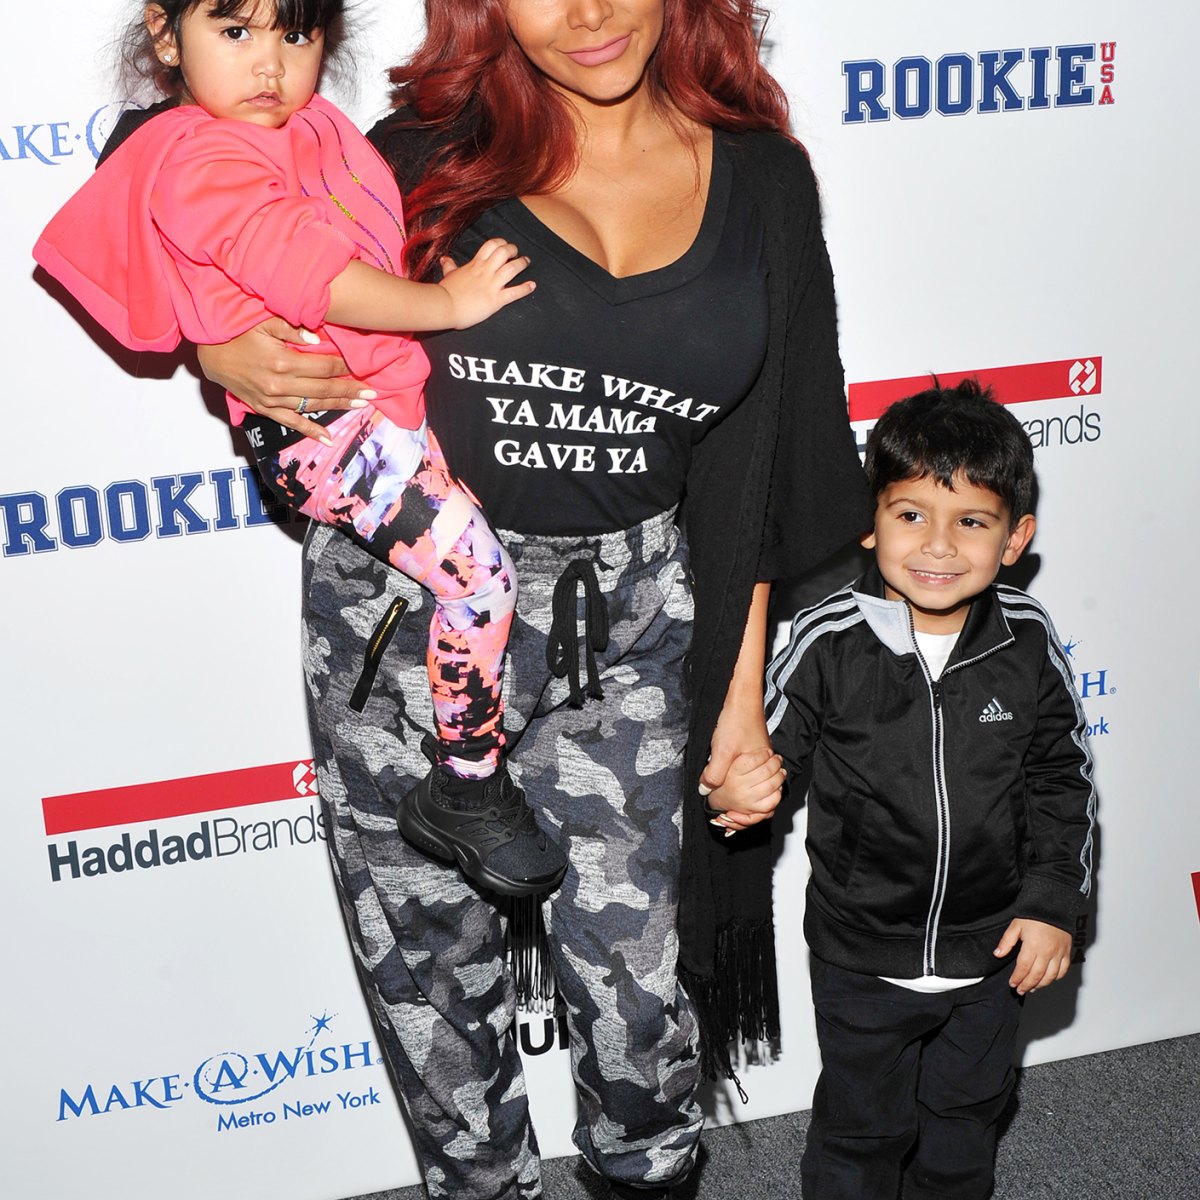 Jersey Shore's Snooki drops her trademark 'poof' for a sleek new